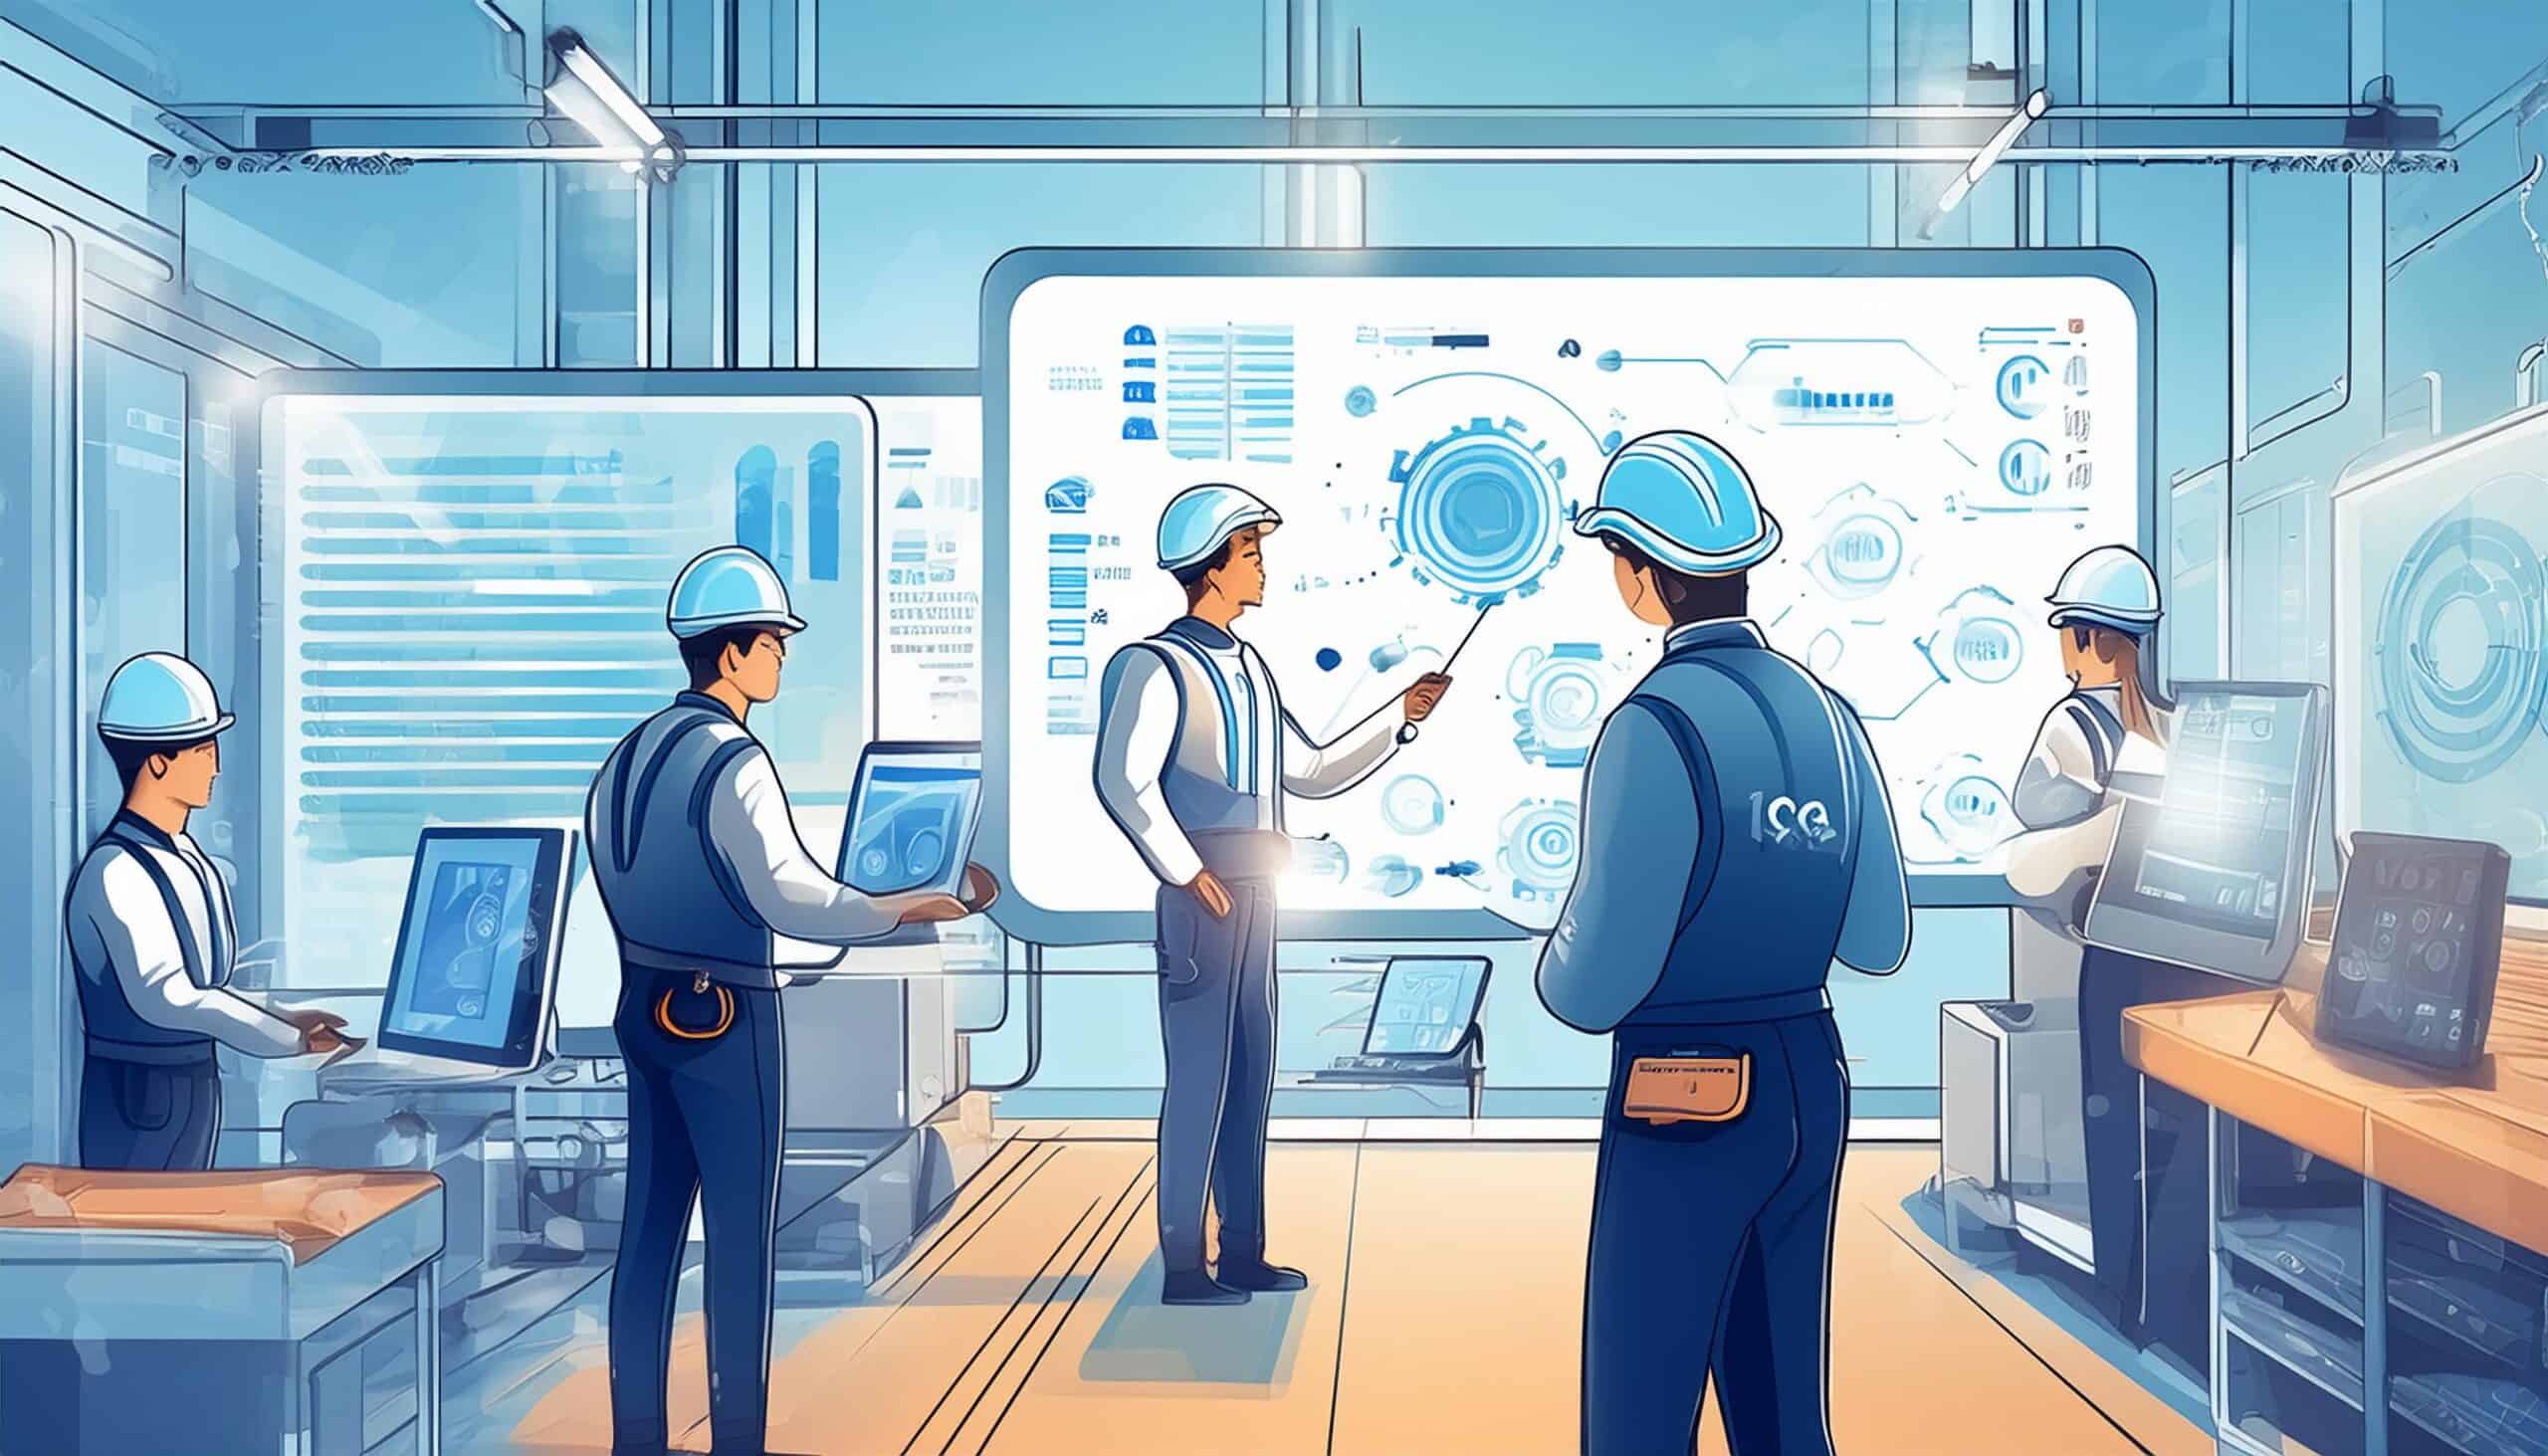 An illustration showing a team of workers participating in a training session with a skilled instructor, emphasizing employee training programs. Nearby, another worker efficiently operates advanced machinery, applying lean manufacturing principles. Charts displaying increased productivity and workflow efficiency are visible on a screen in the background. The scene highlights a motivated workforce, reduced labor costs, and continuous improvement efforts.